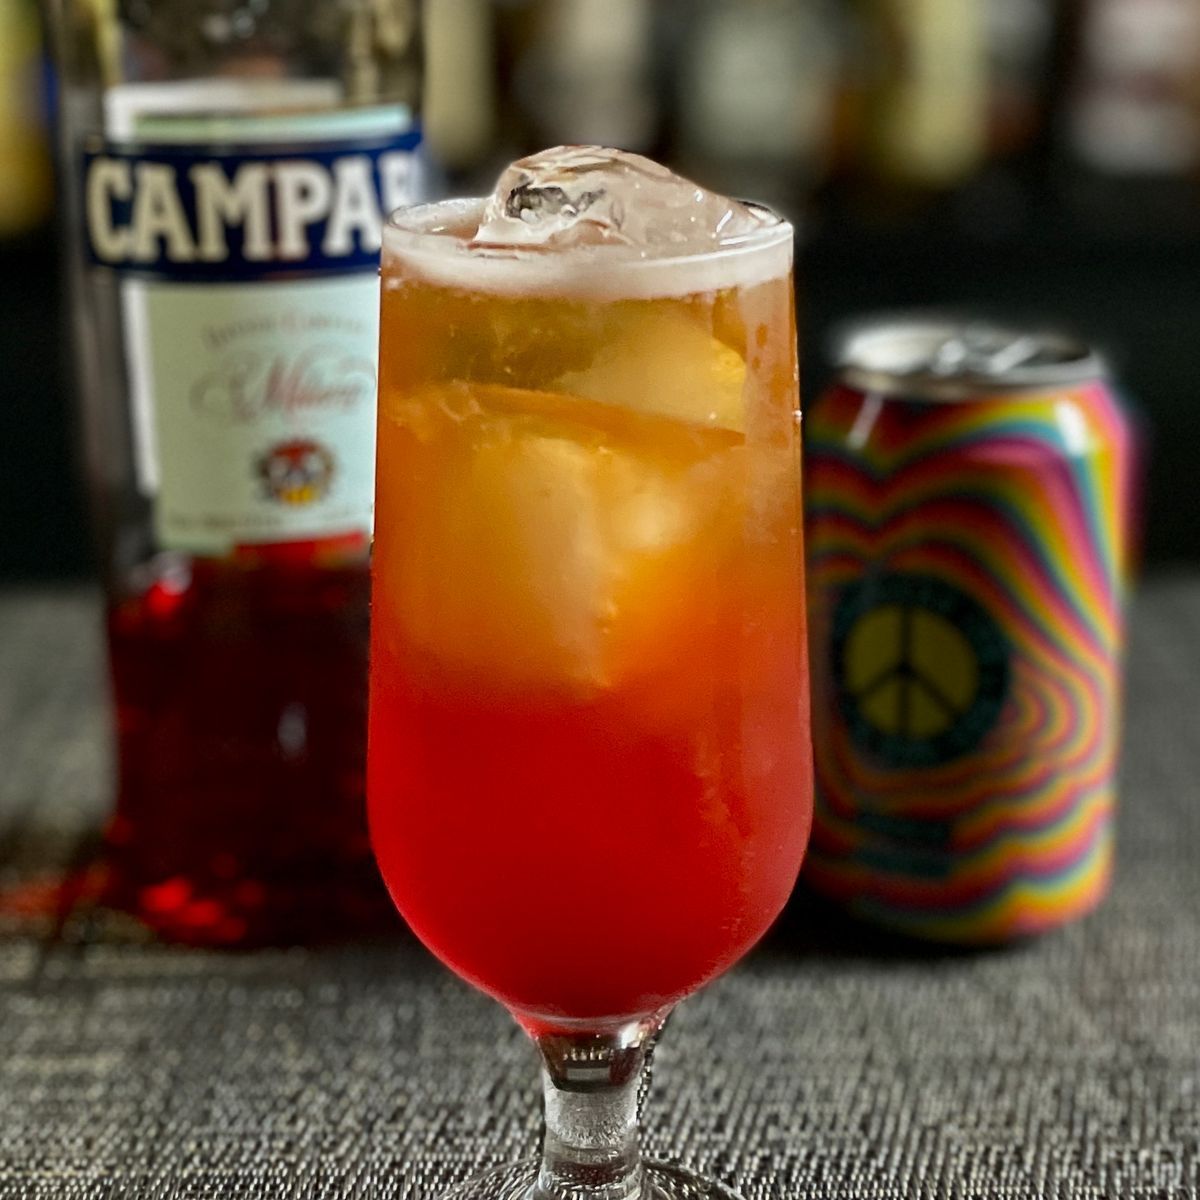 This is a take on the classic Campari Spritz.